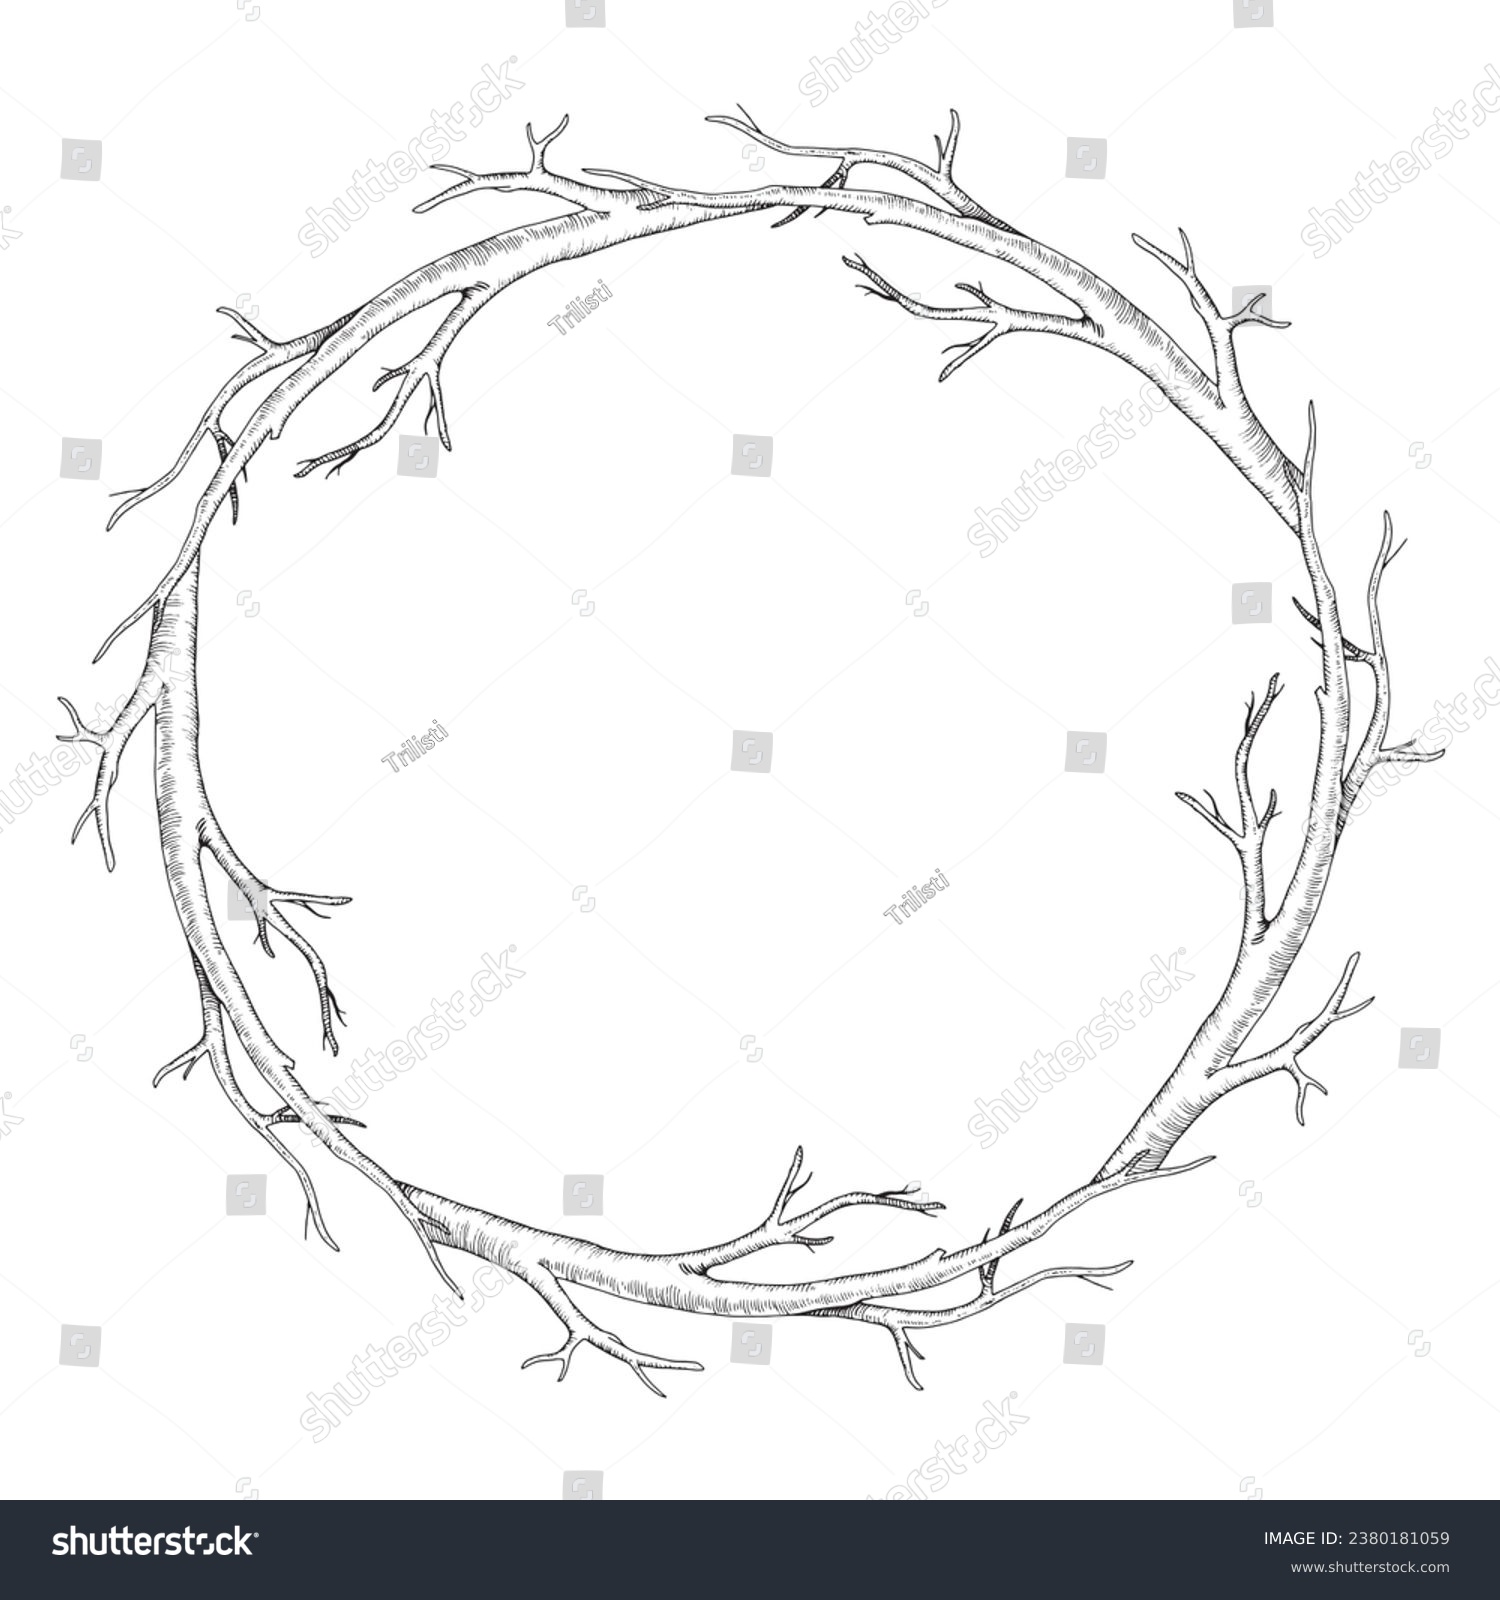 SVG of Branch tree wreath. Vector illustration of dry leaf less twig. Hand drawn graphic clipart on isolated background. Linear drawing of round frame border. Outline sketch of stick. Black contour line art svg